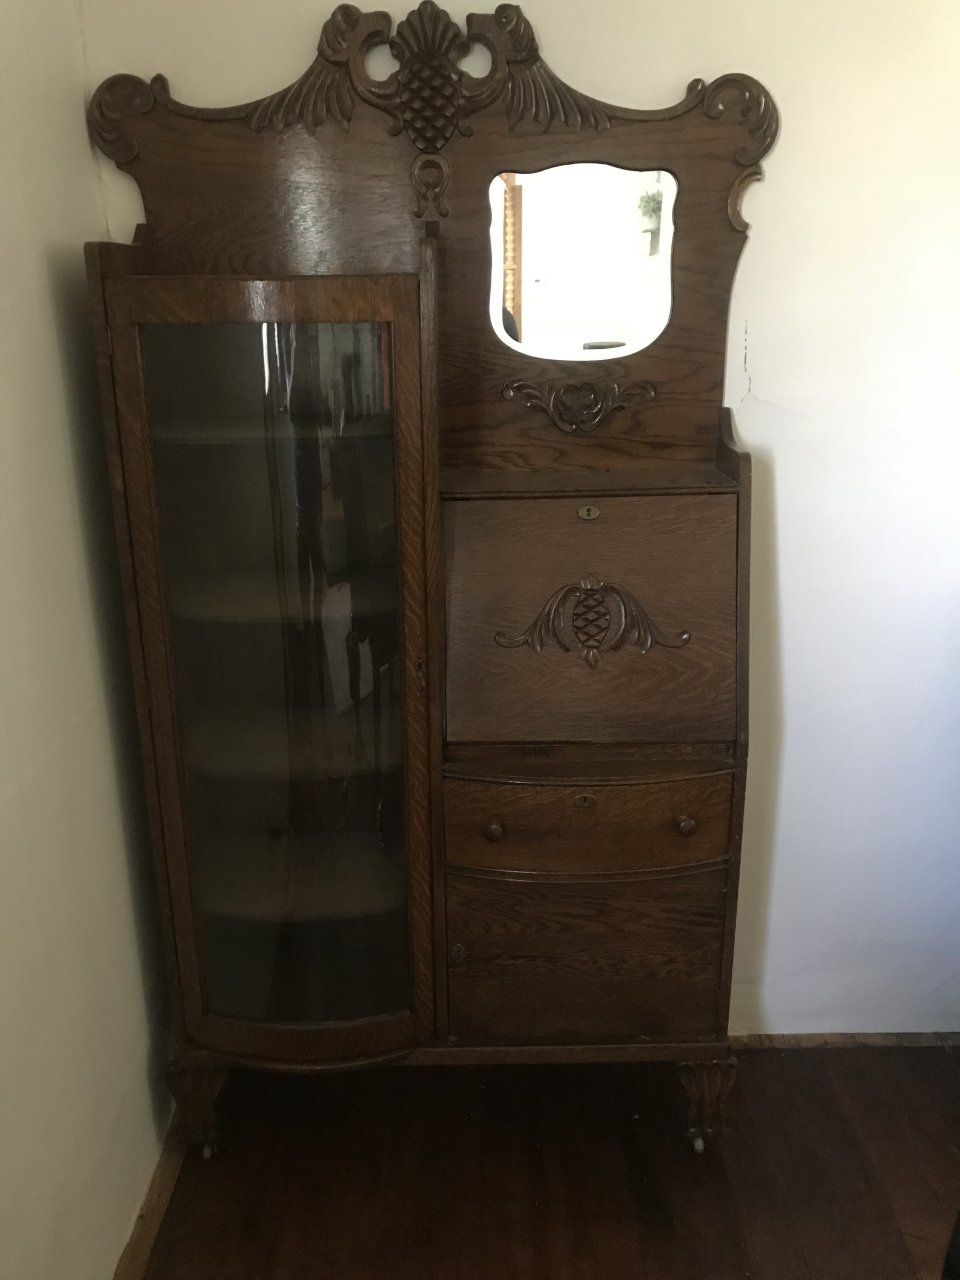 Value Of This Curved Glass Secretary? | My Antique Furniture Collection